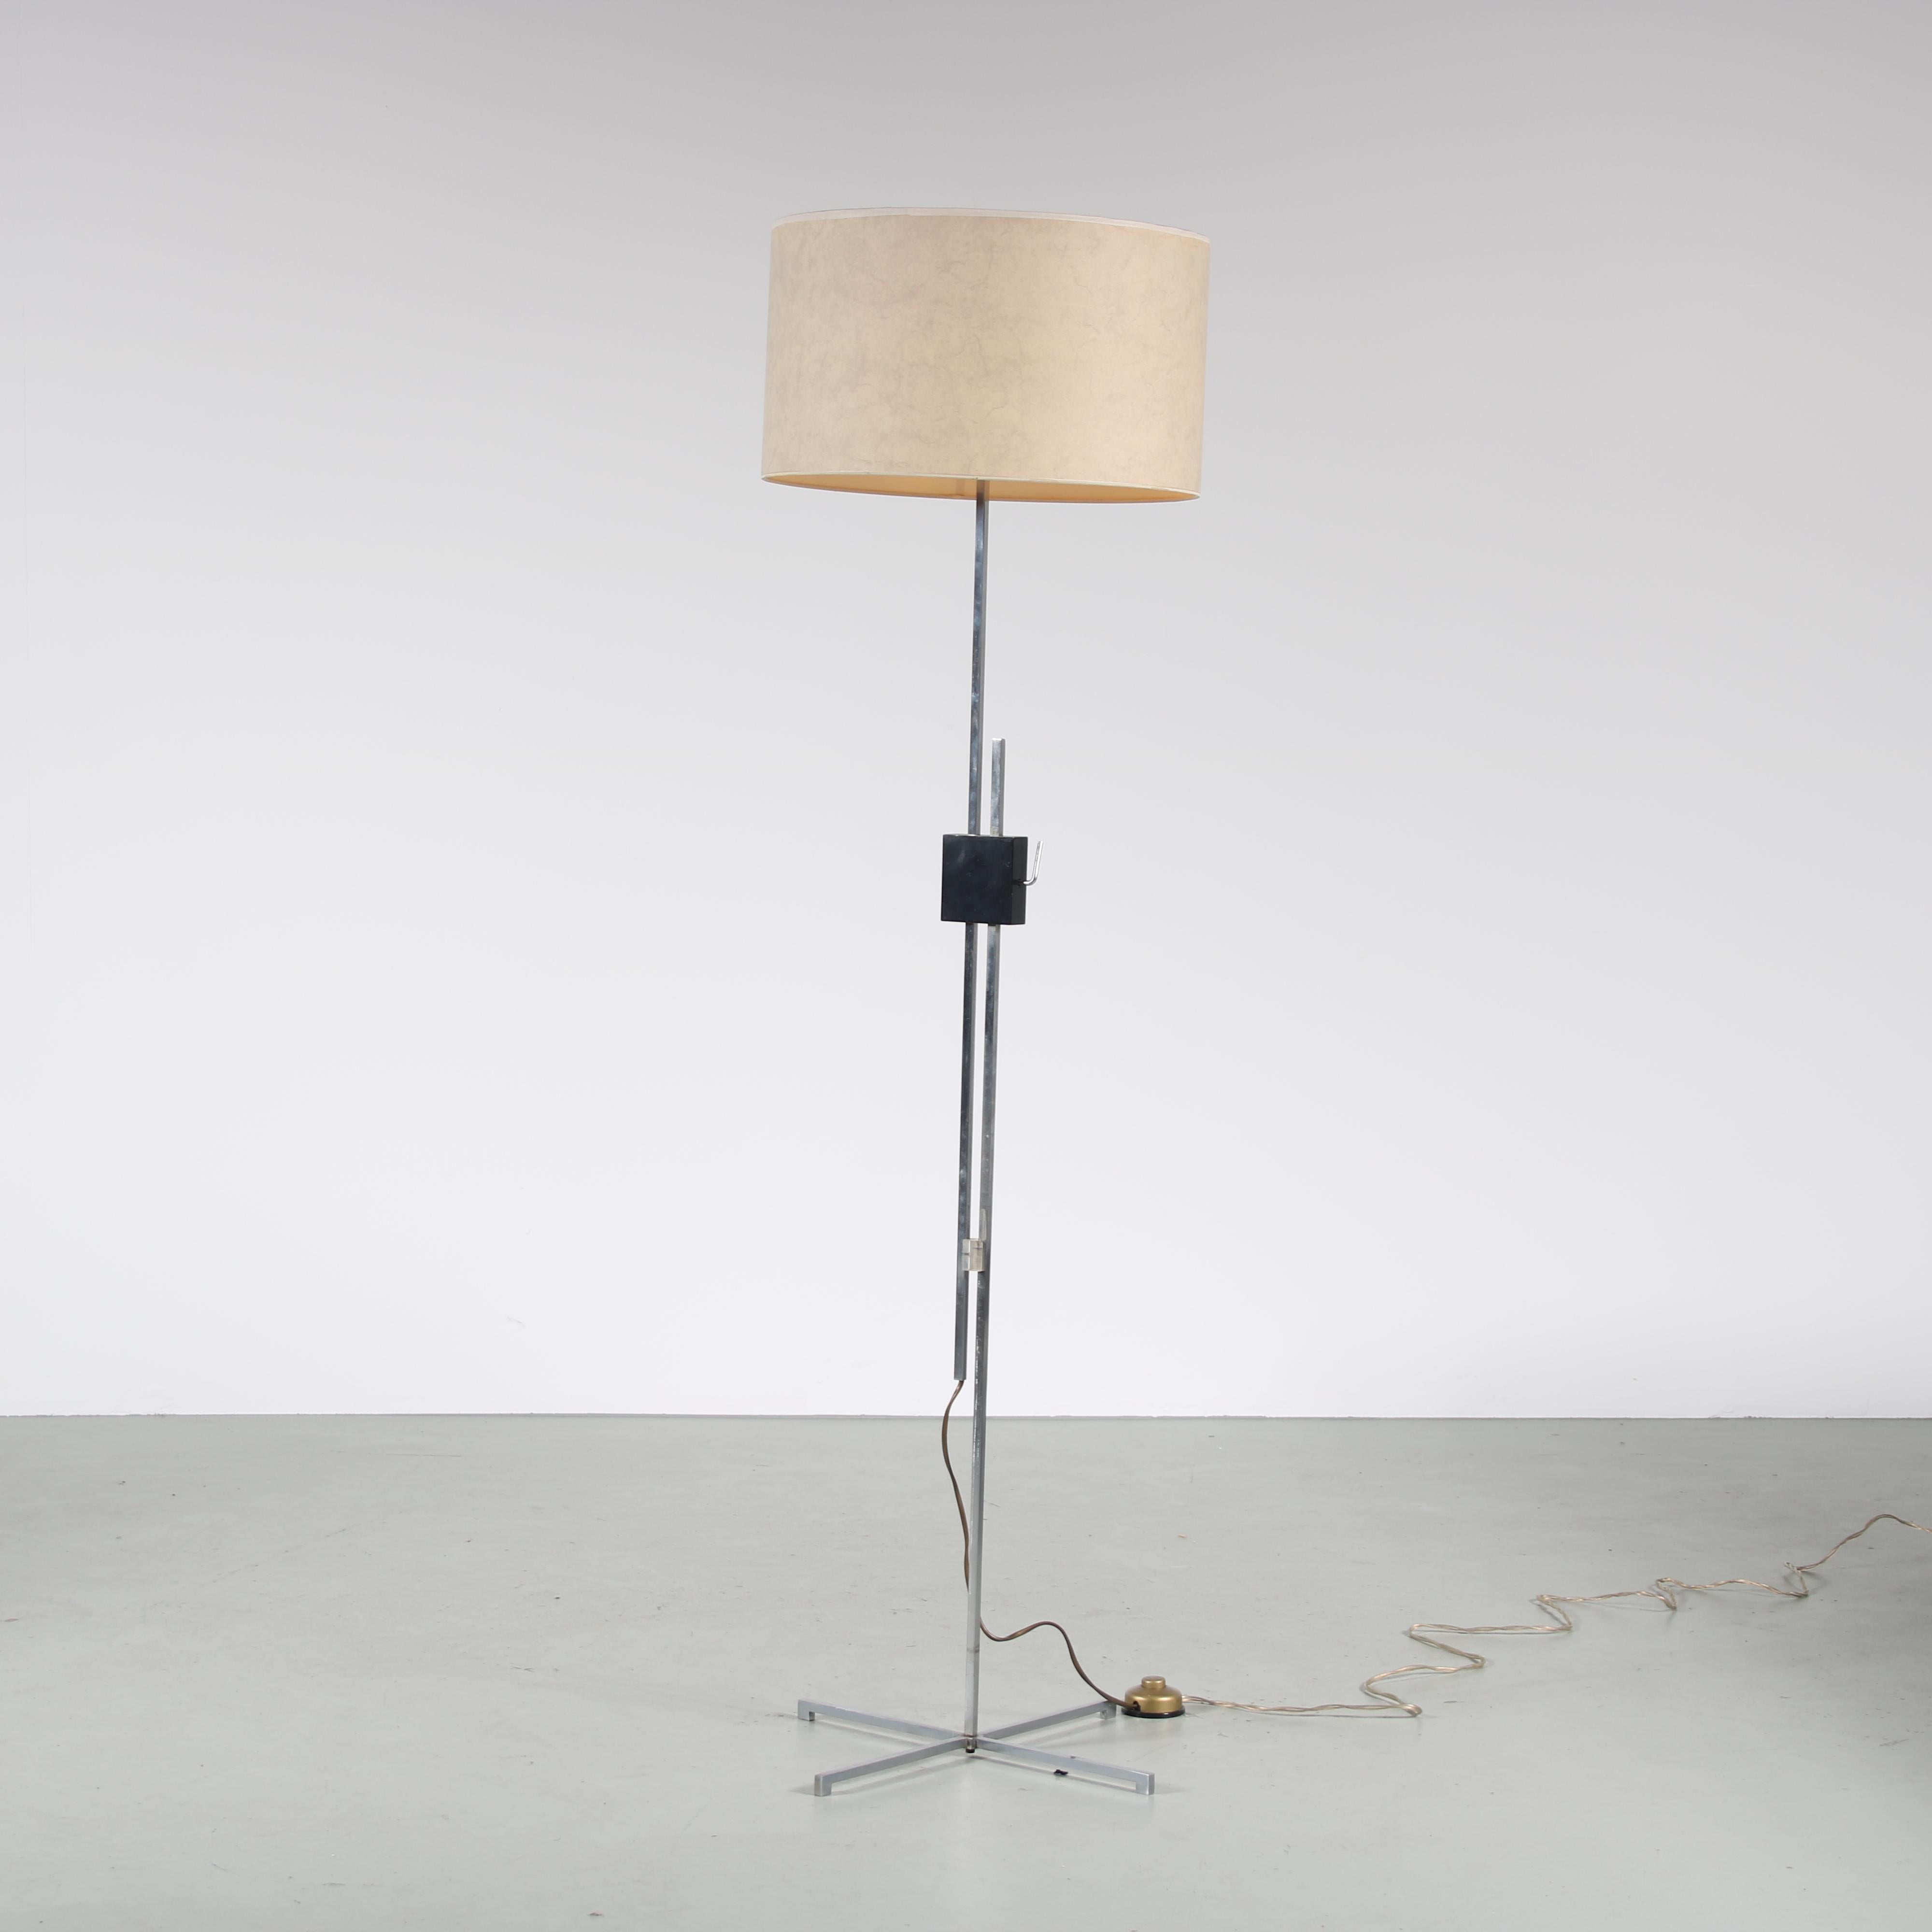 A minimalist floor lamp designed by Hans Eichenberger, manufactured by Keller Metalbau in Germany around 1950.

This elegant piece is made of high quality chrome plated metal in thin, rectangular shape. It has a crossbase and two piece arm that